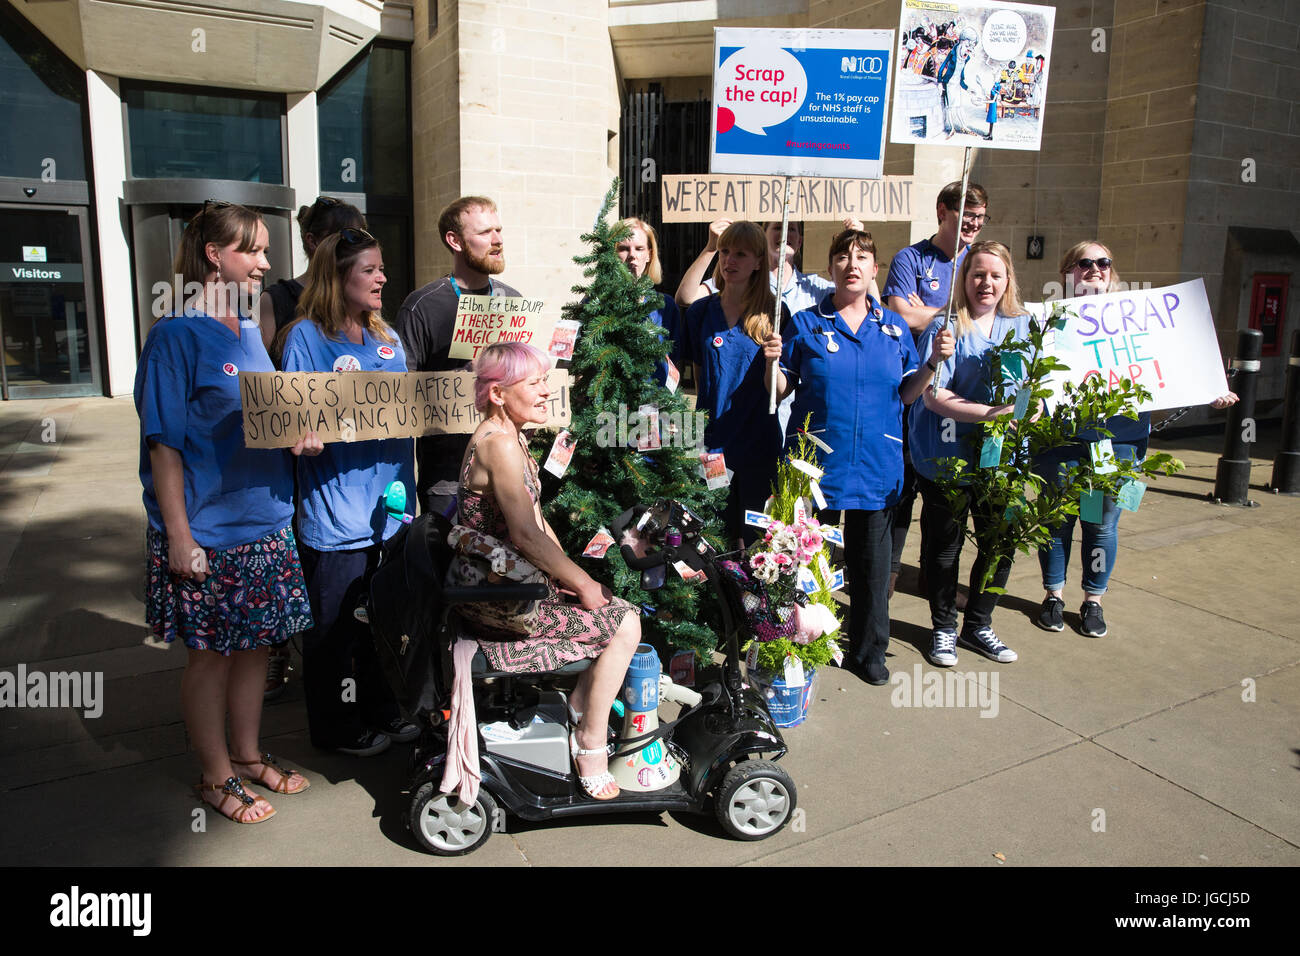 London, UK. 5th July, 2017. Nurses attend a 'Scrap the Cap' protest against ongoing cuts to the National Health Service outside the Department of Health, during which they attempted to deliver a magic money tree and a birthday cake marking the 69th birthday of the NHS. Credit: Mark Kerrison/Alamy Live News Stock Photo